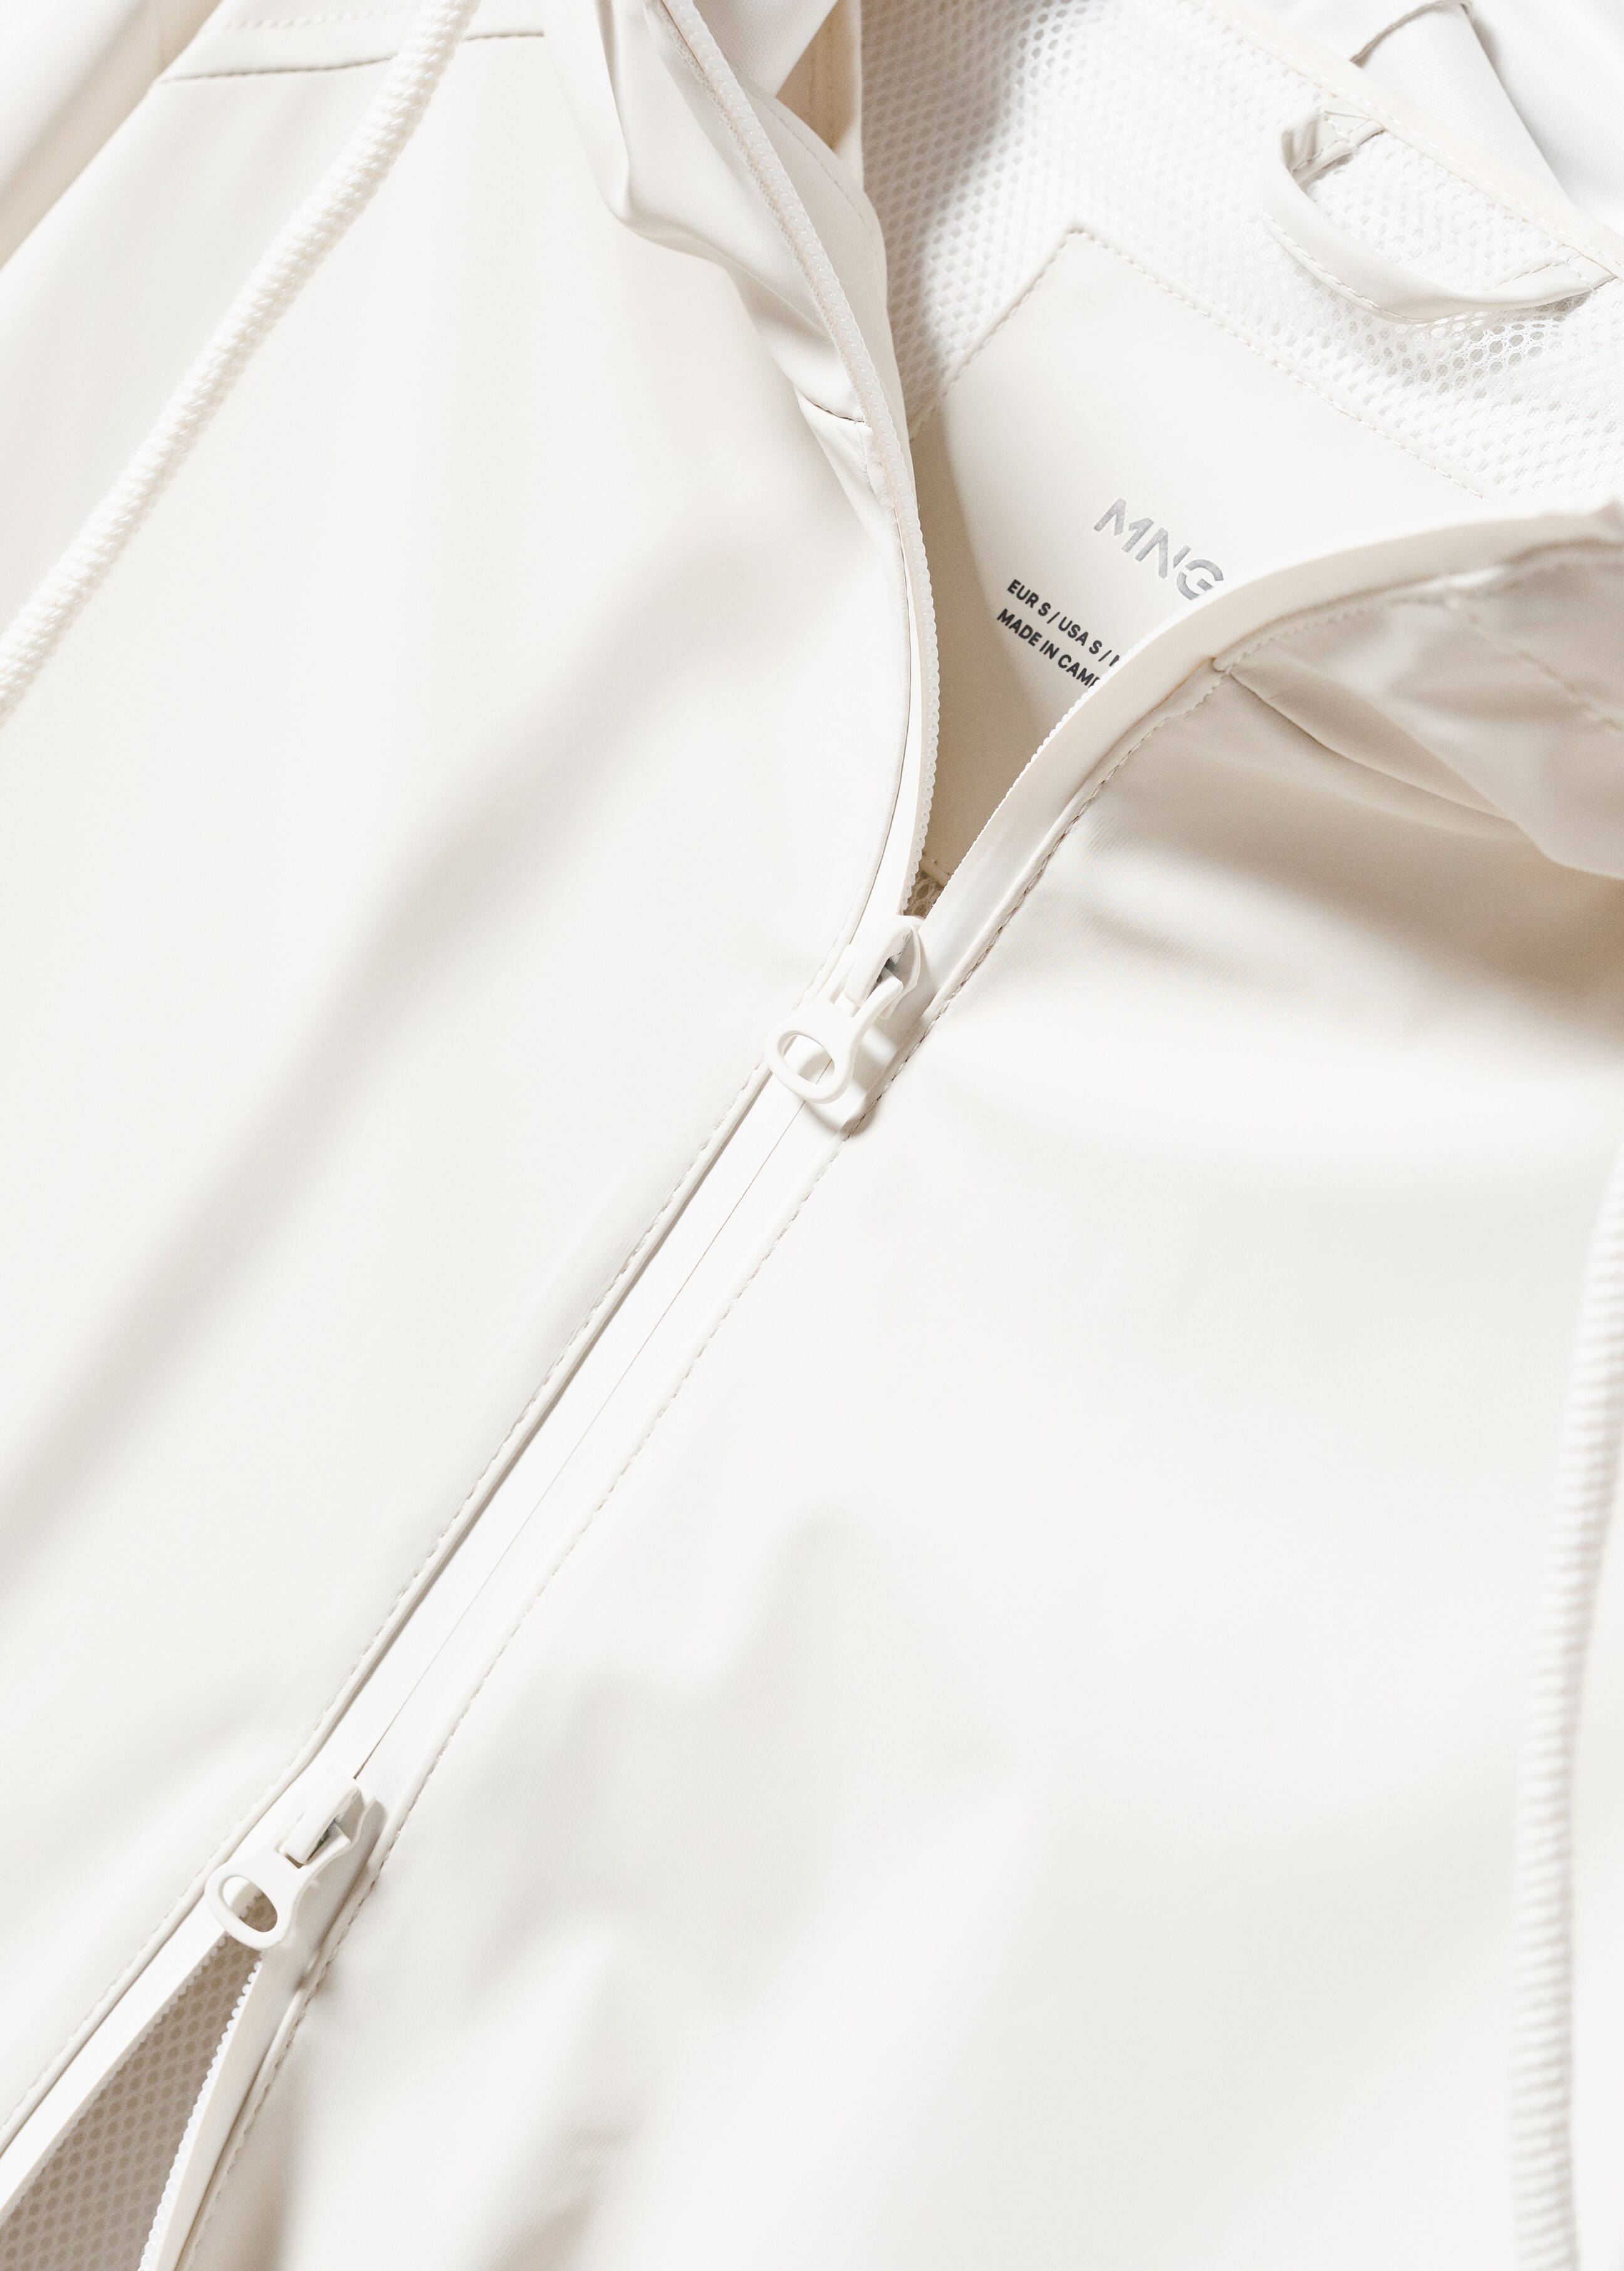 Waterproof parka - Details of the article 8